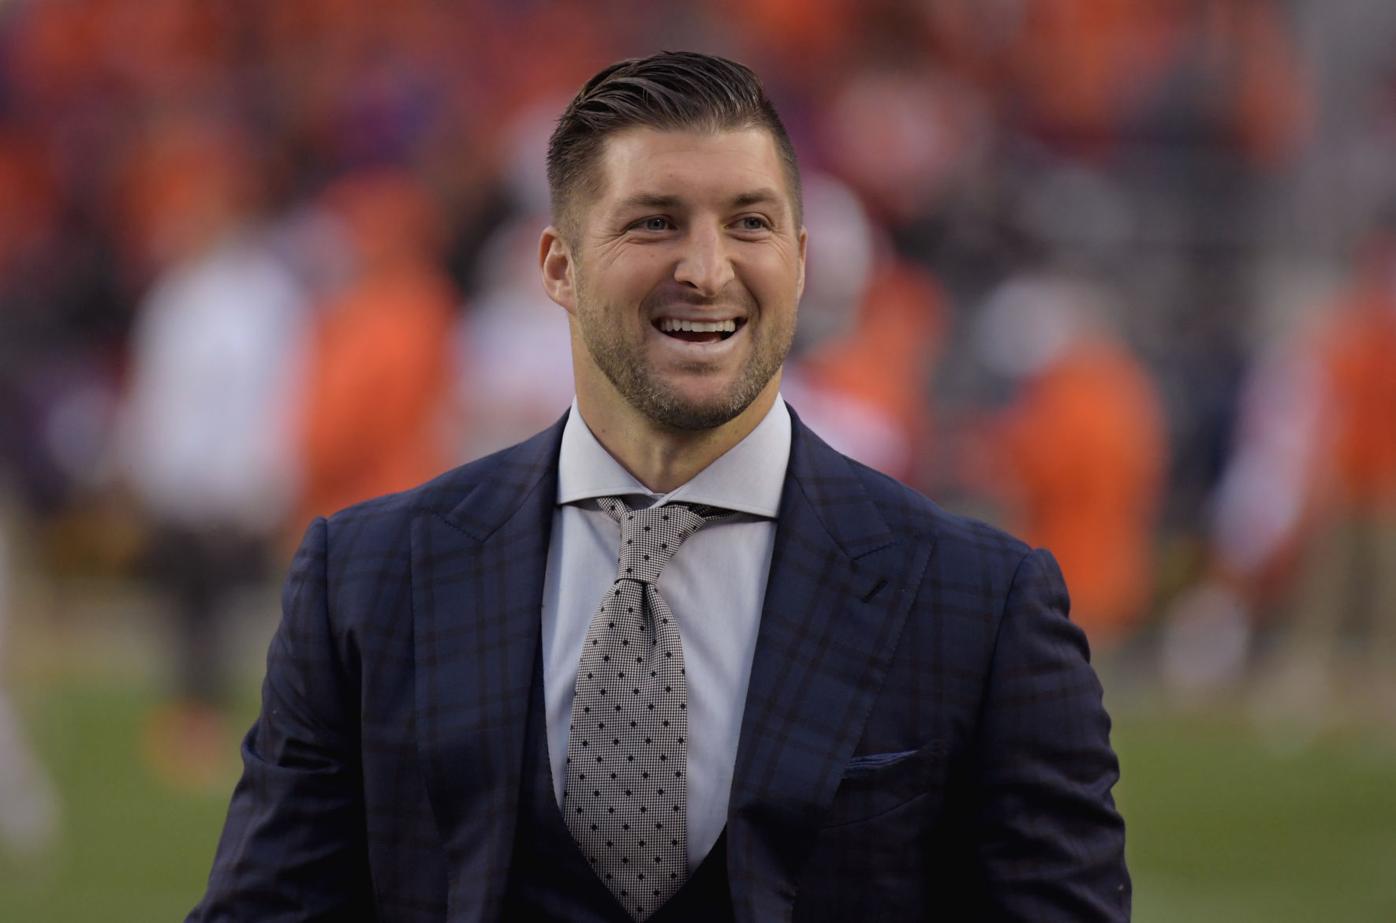 Demi-Leigh Nel-Peters Surprises Tim Tebow with High School Jersey